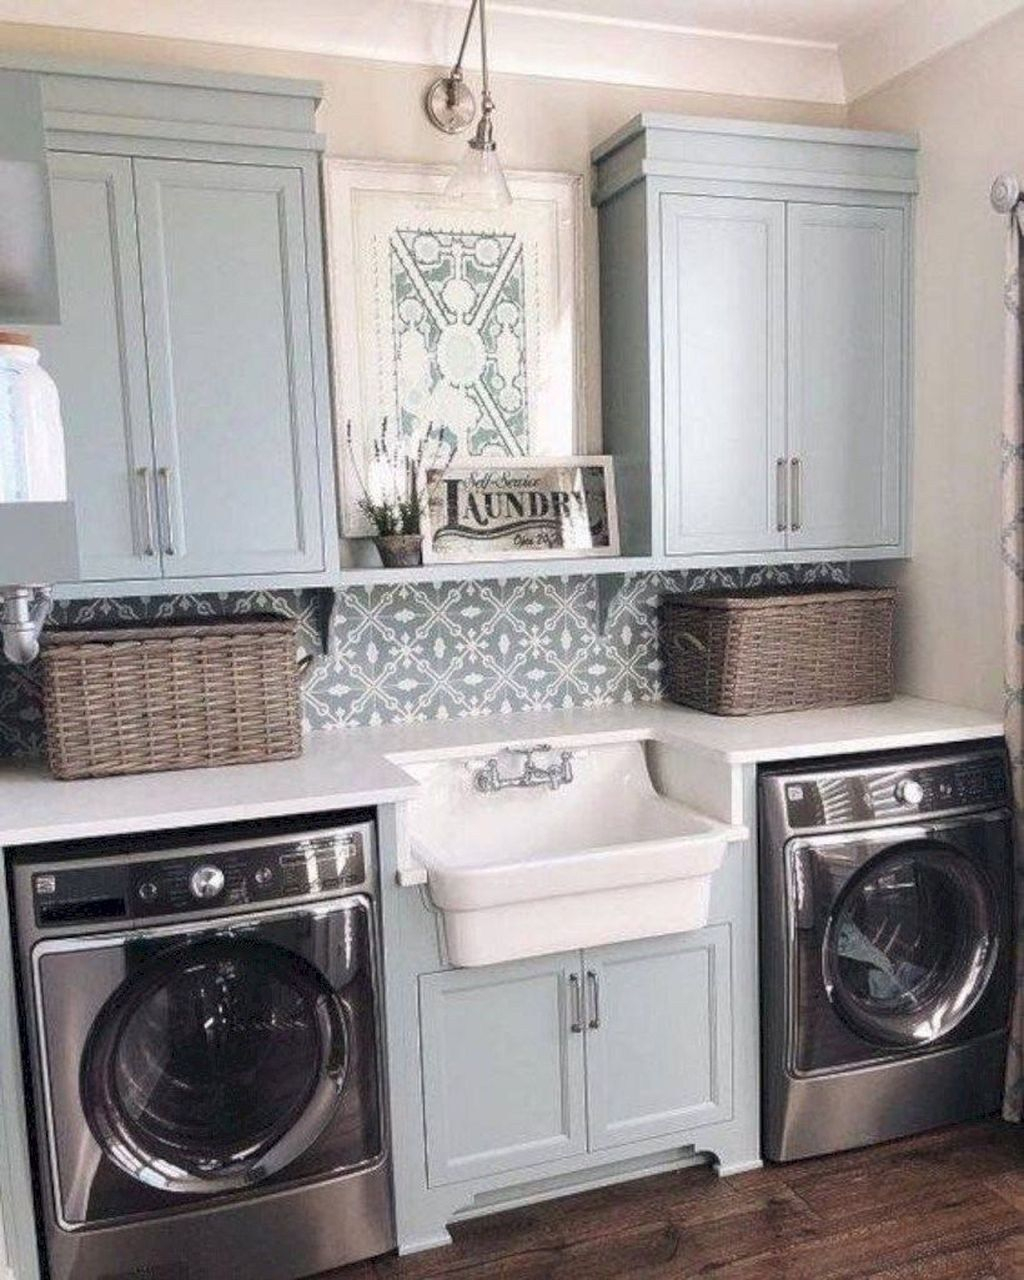 Favored Laundry Room Organization Ideas To Try 24